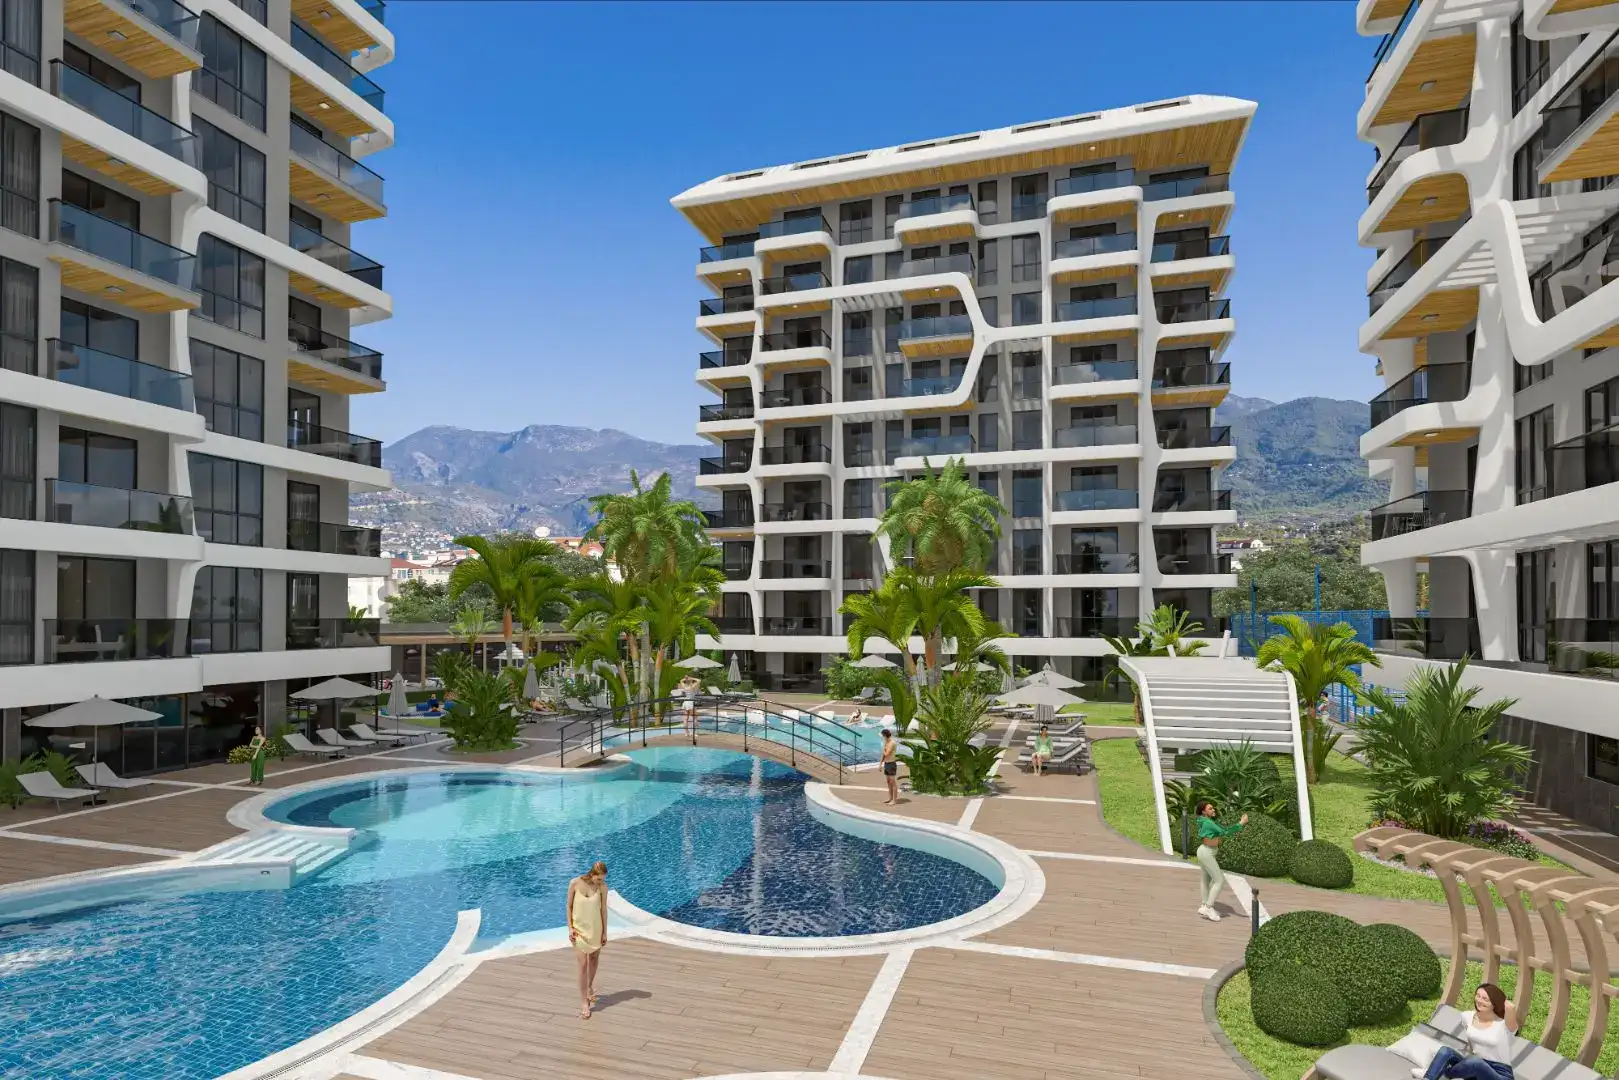 NEW PREMIUM PROJECT IN ALANYA TOSMUR DISTRICT 400M FROM THE SEA